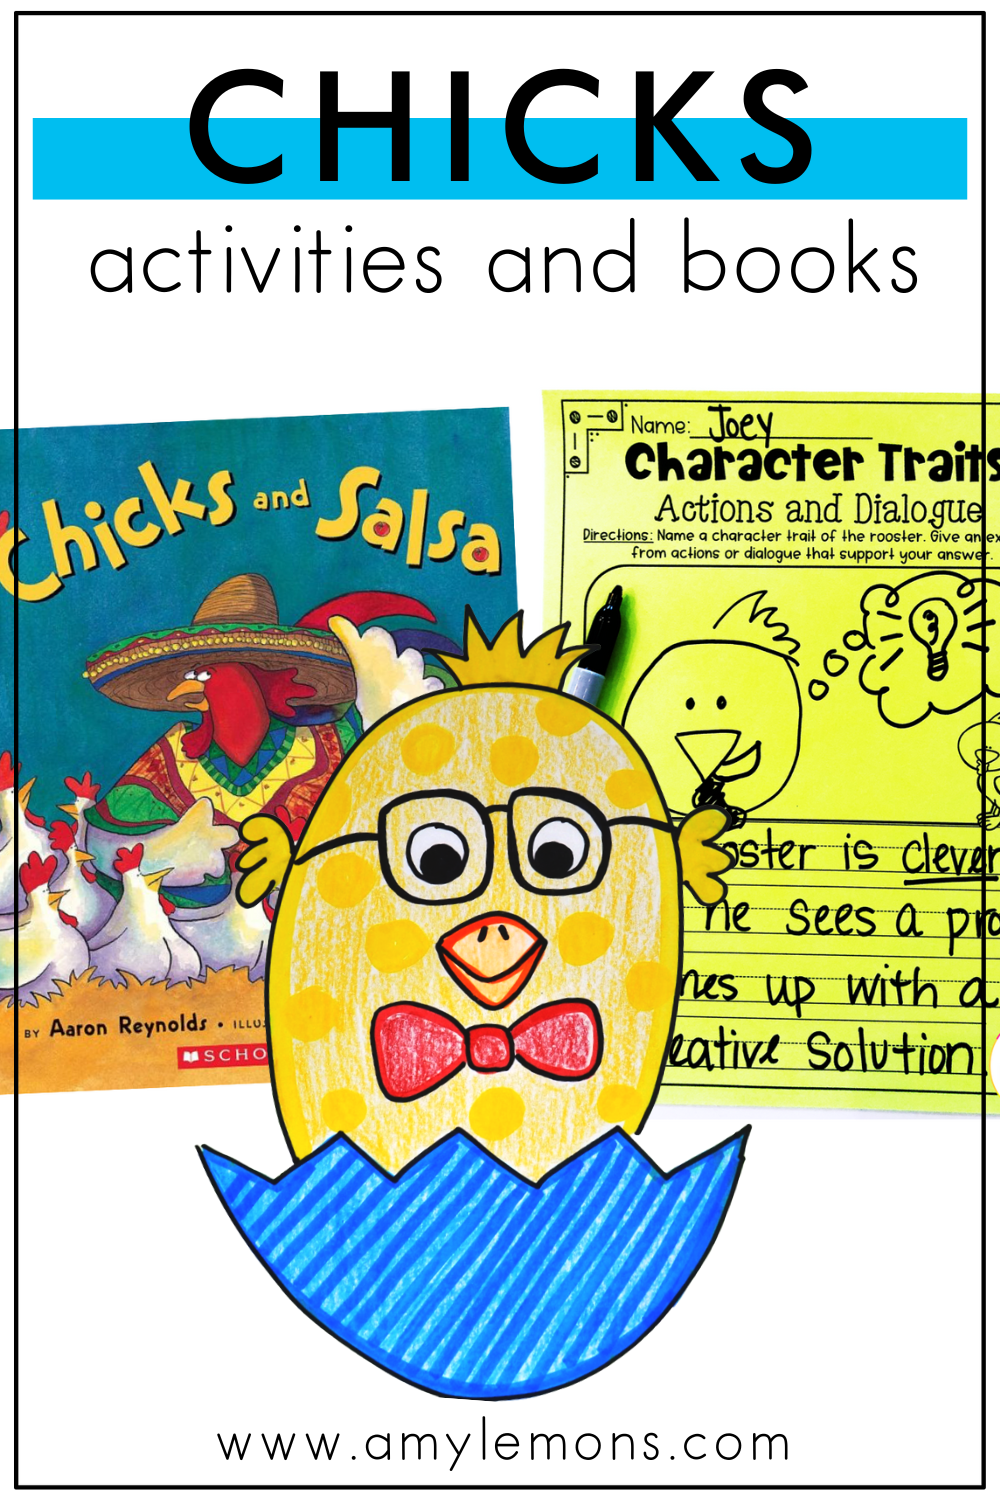 chick activities and books